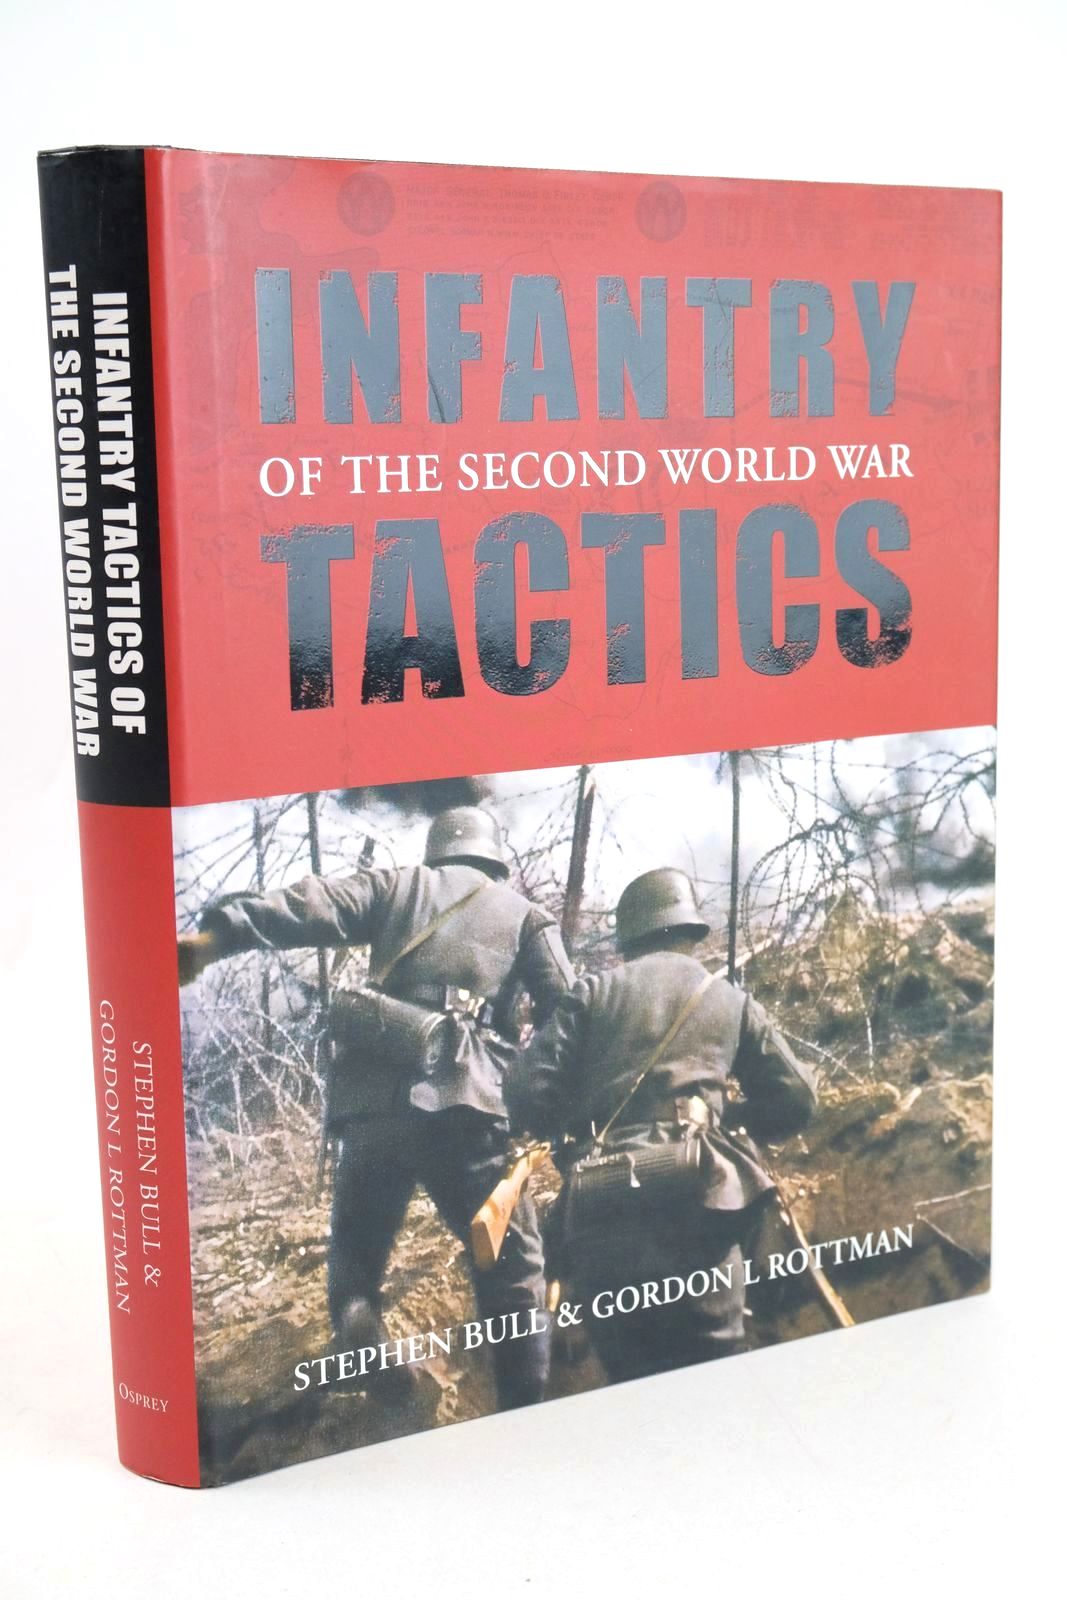 Photo of INFANTRY TACTICS OF THE SECOND WORLD WAR written by Bull, Stephen Rottman, Gordon published by Osprey Publishing (STOCK CODE: 1327877)  for sale by Stella & Rose's Books